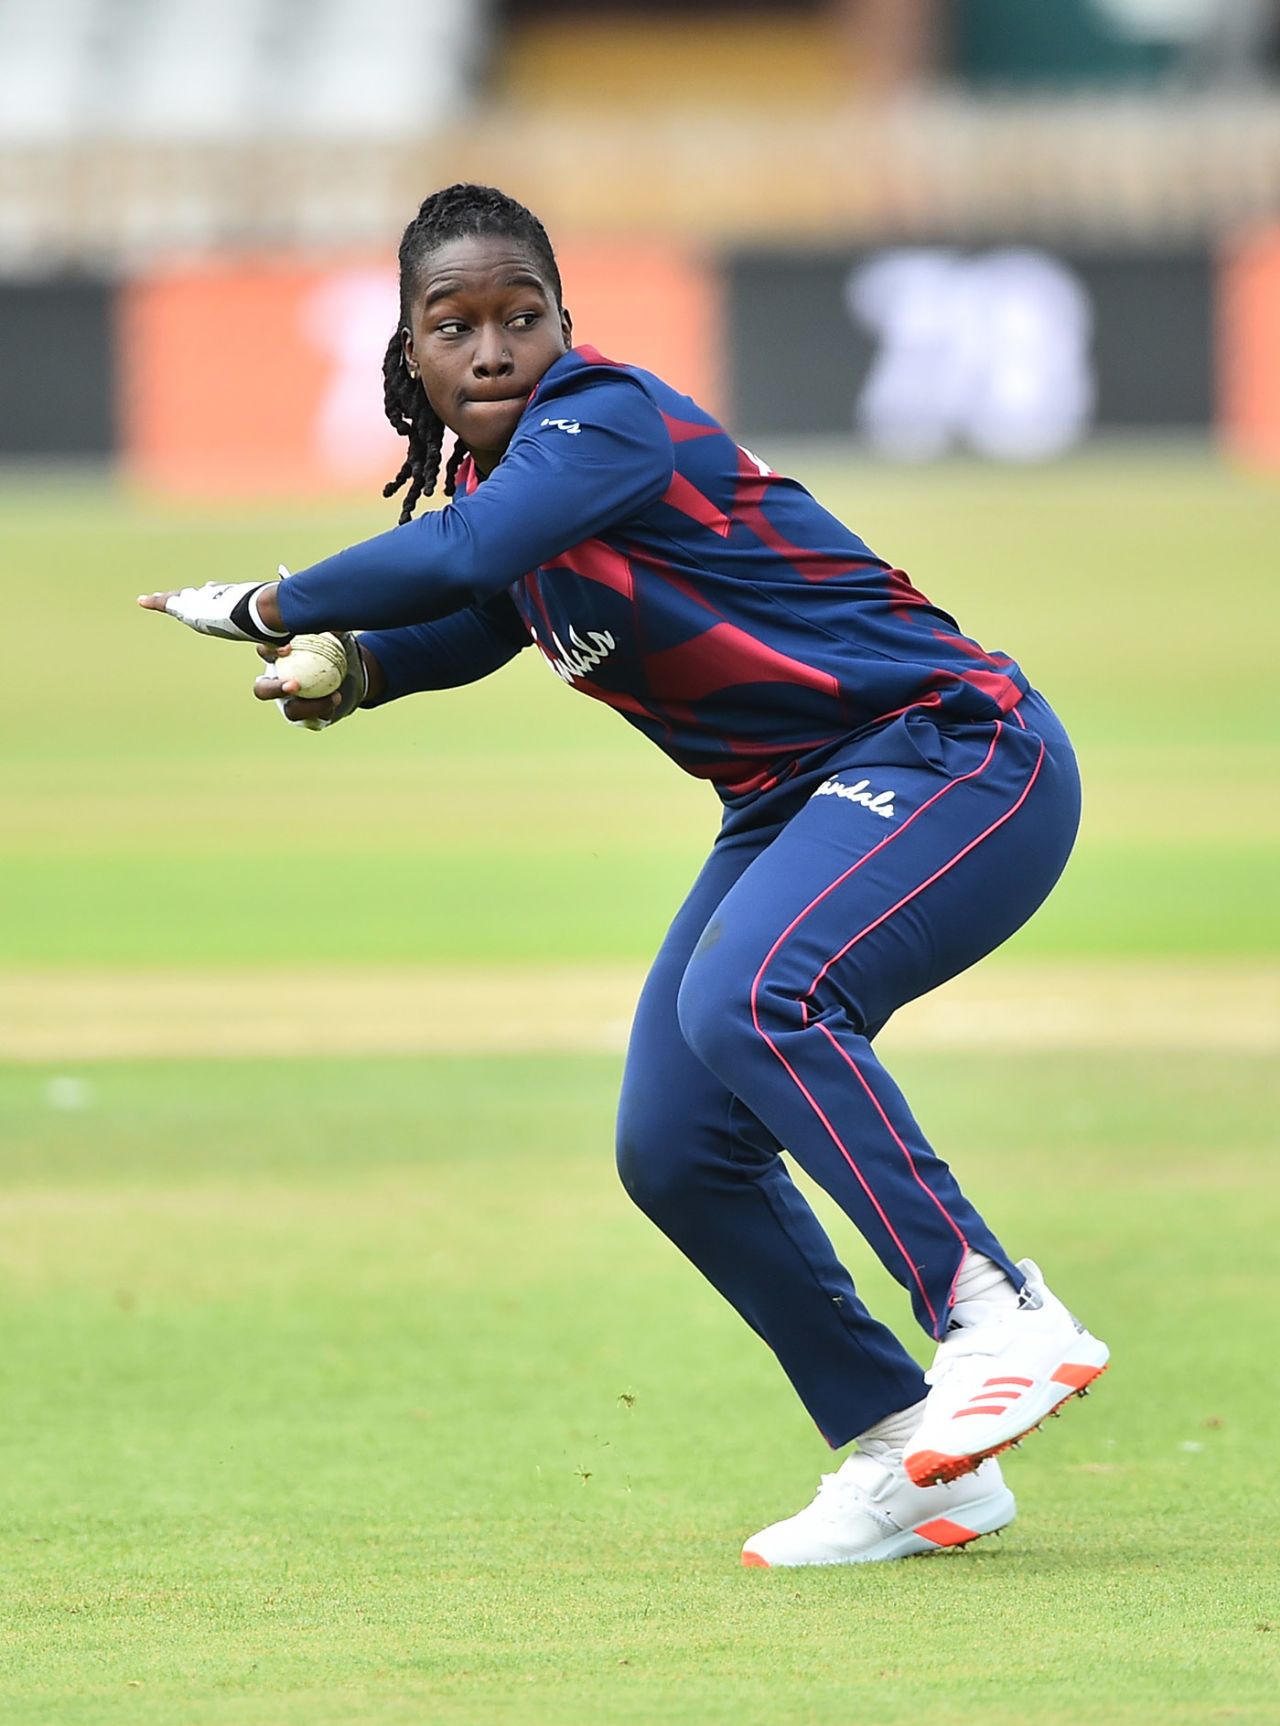 Deandra Dottin throws the ball in during West Indies training, Derby, September 20, 2020